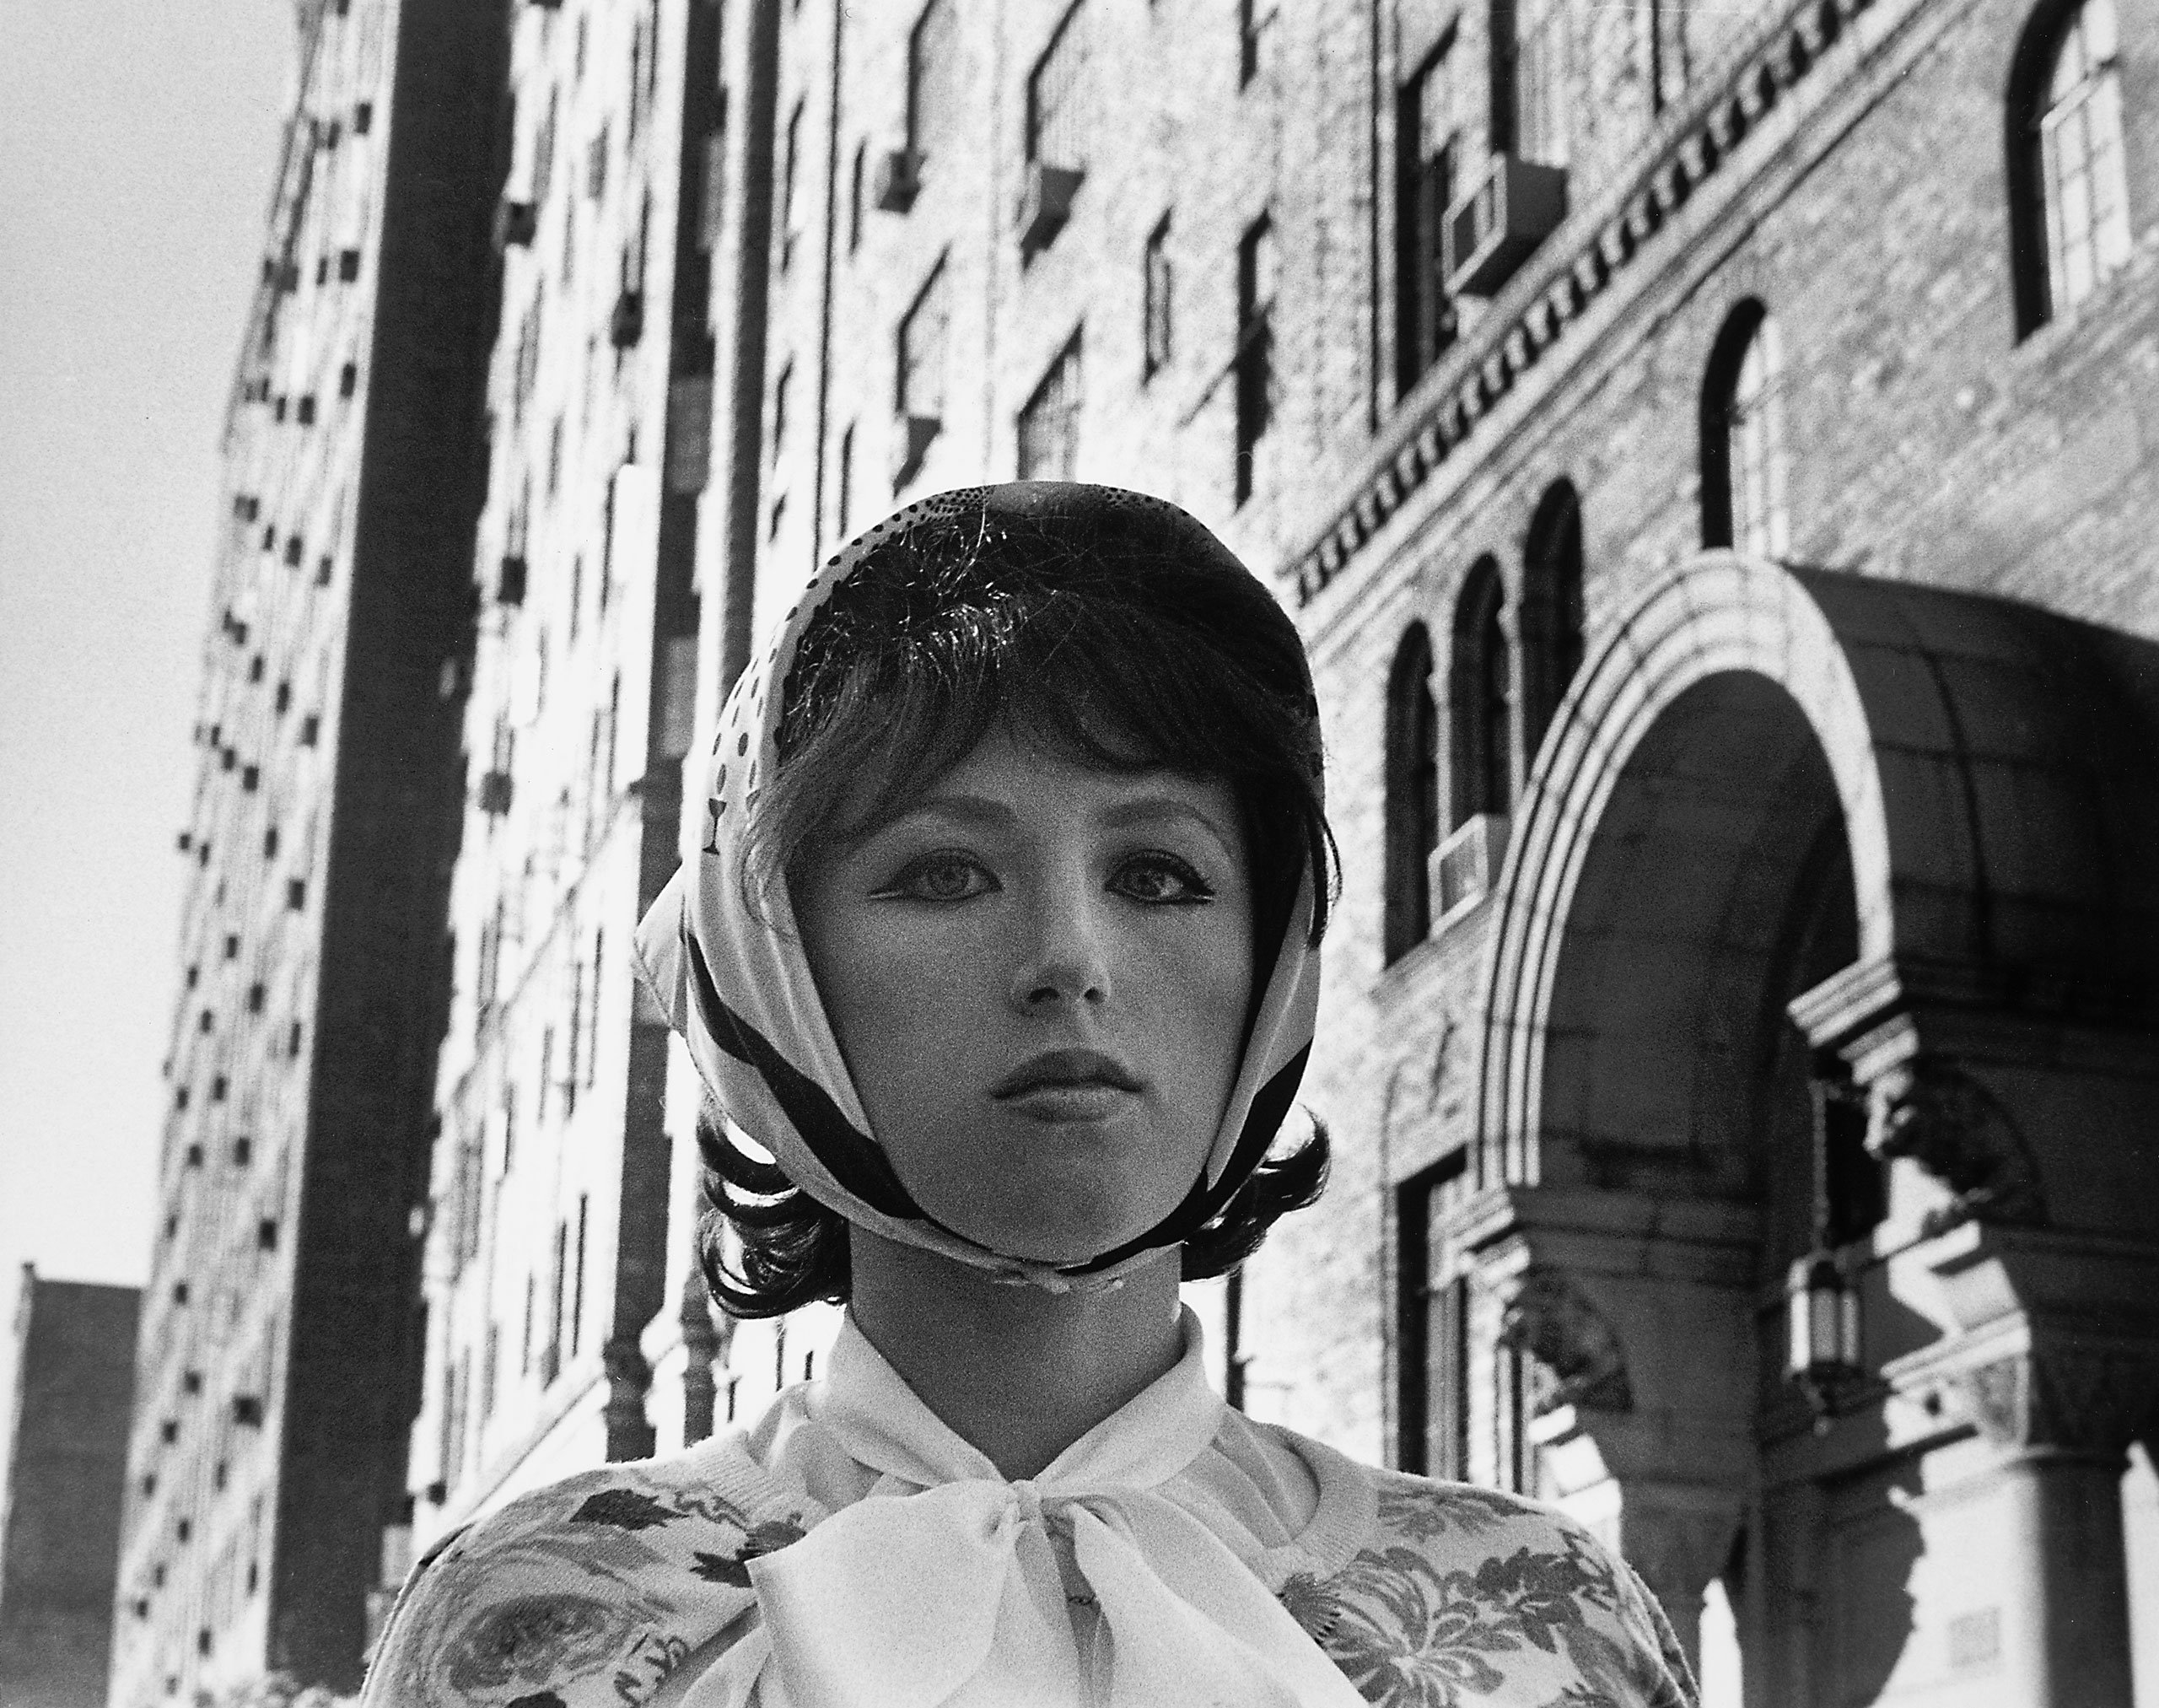 Cindy Sherman, Untitled Film Still #17, 1978.
© Cindy Sherman, courtesy of the artist and Hauser &amp; Wirth Gallery.